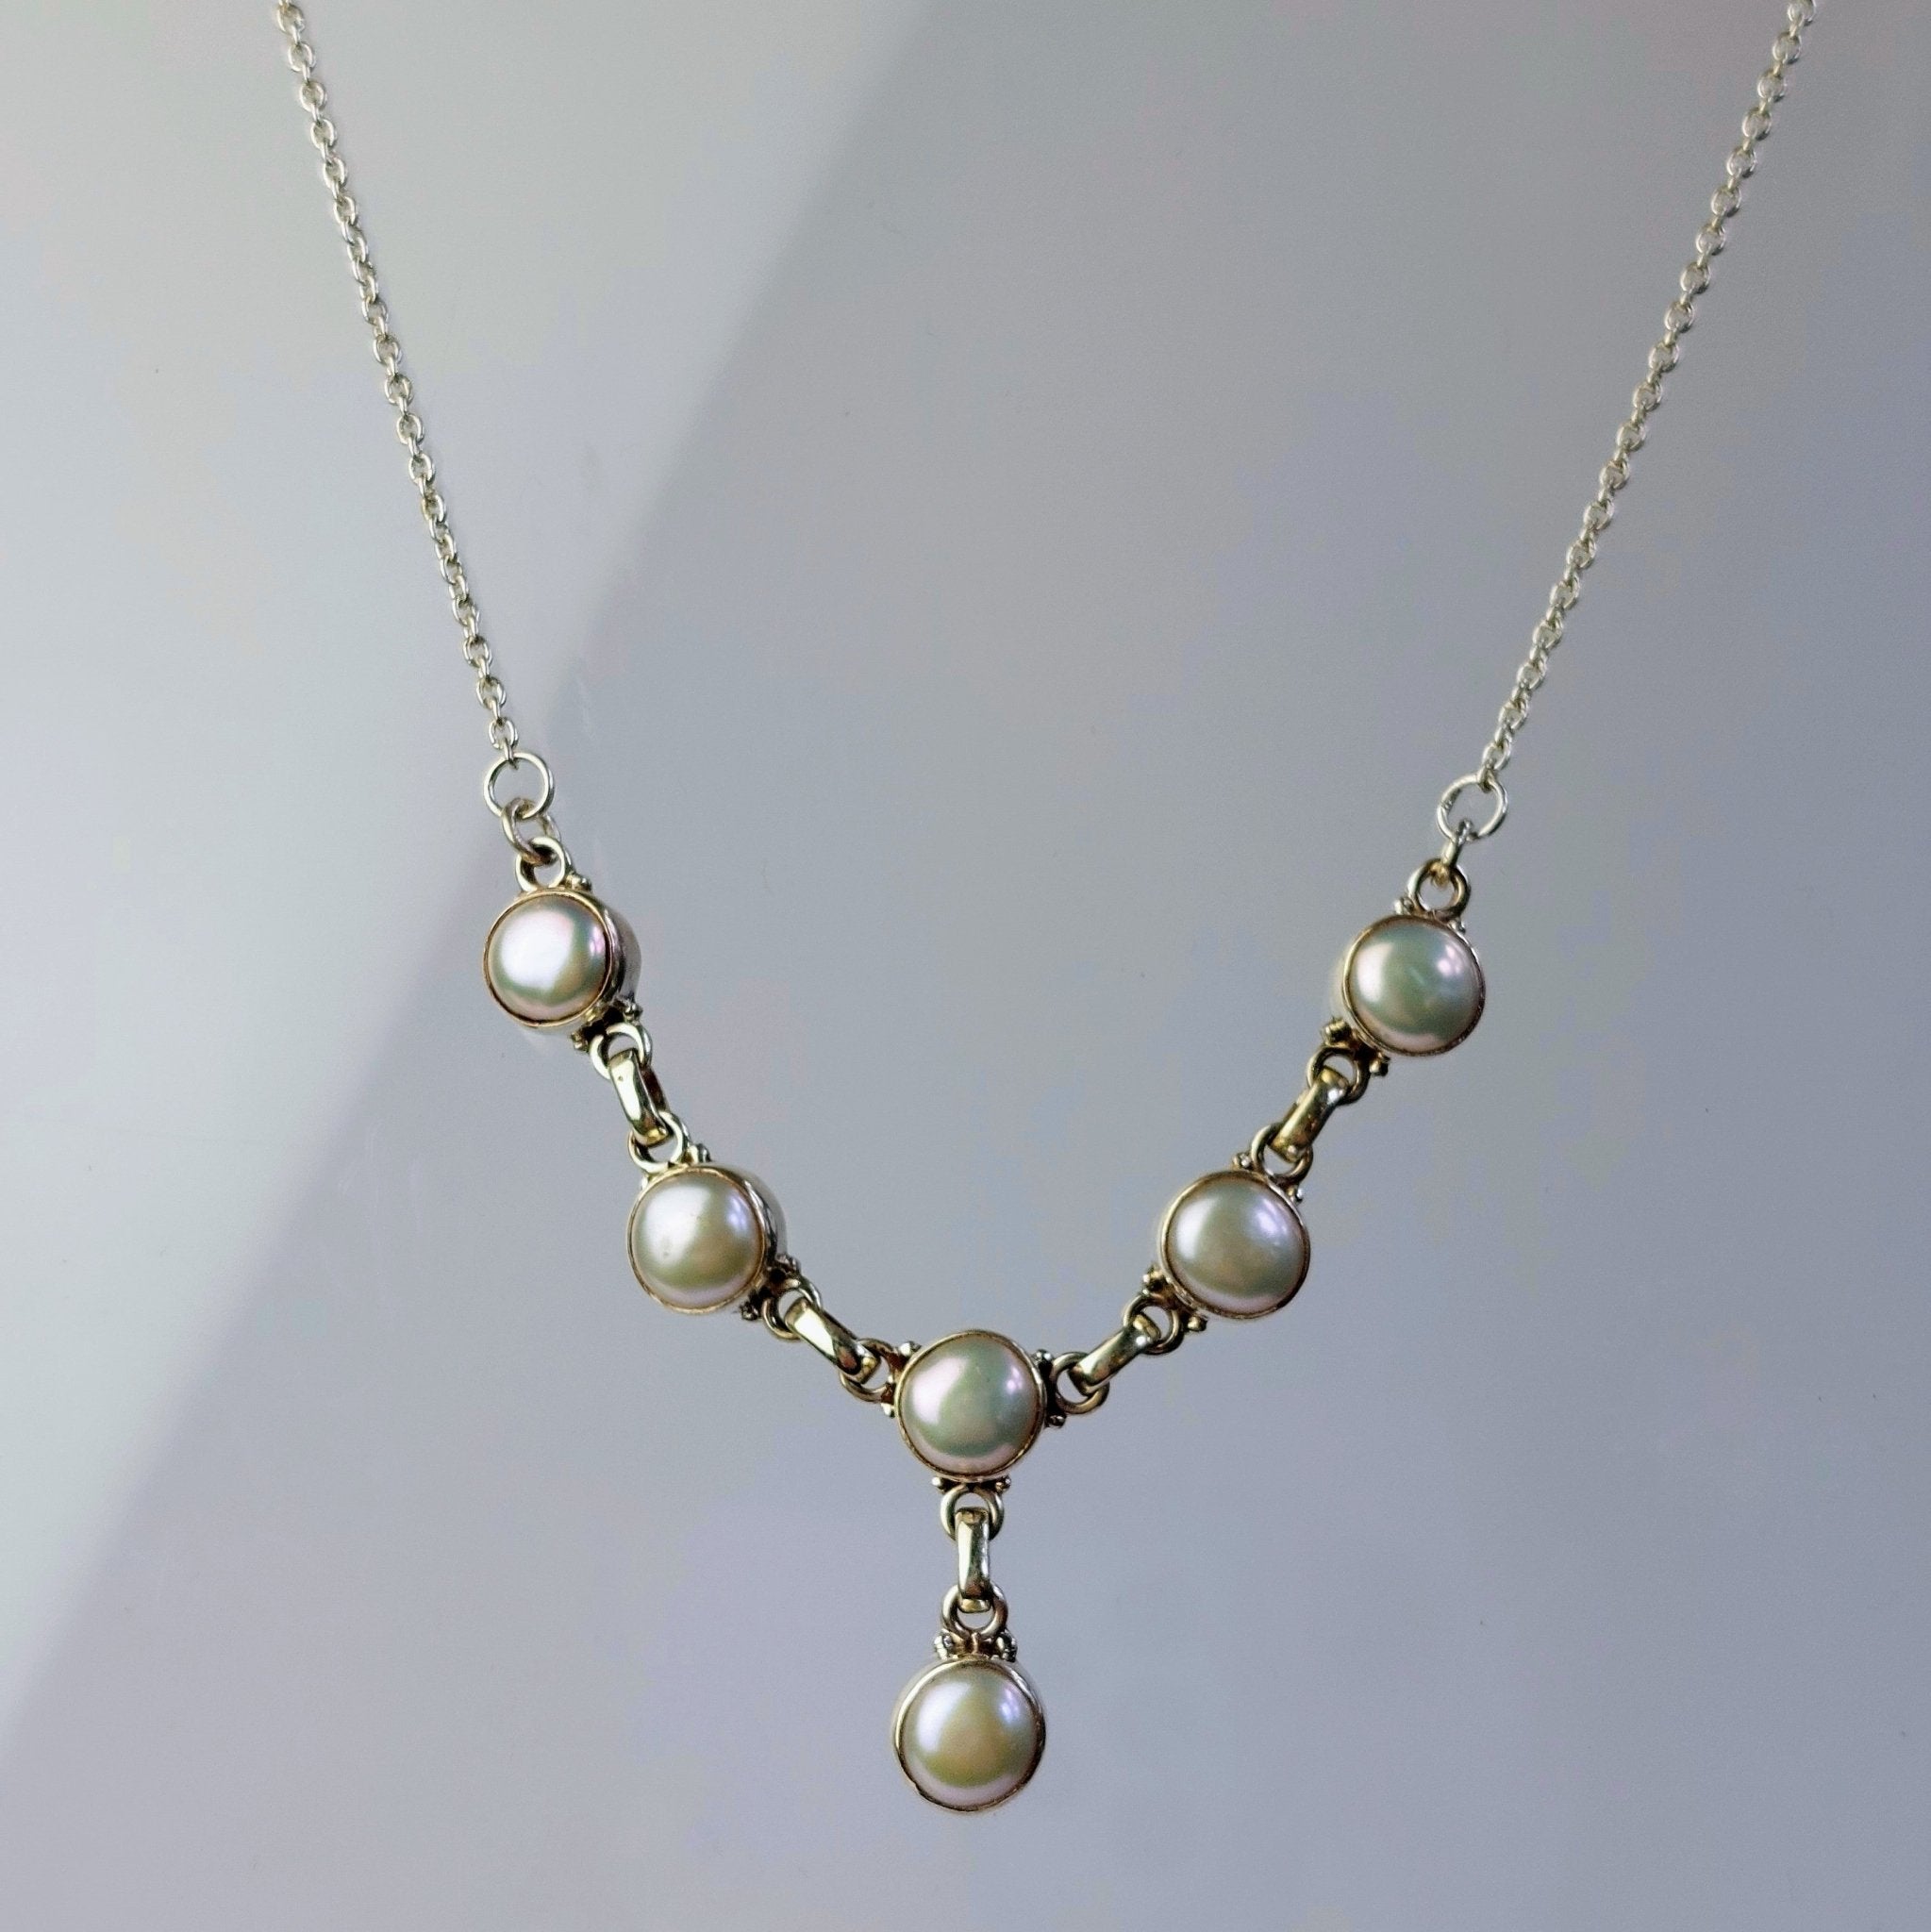 Pearl Necklace - The Nancy Smillie Shop - Art, Jewellery & Designer Gifts Glasgow